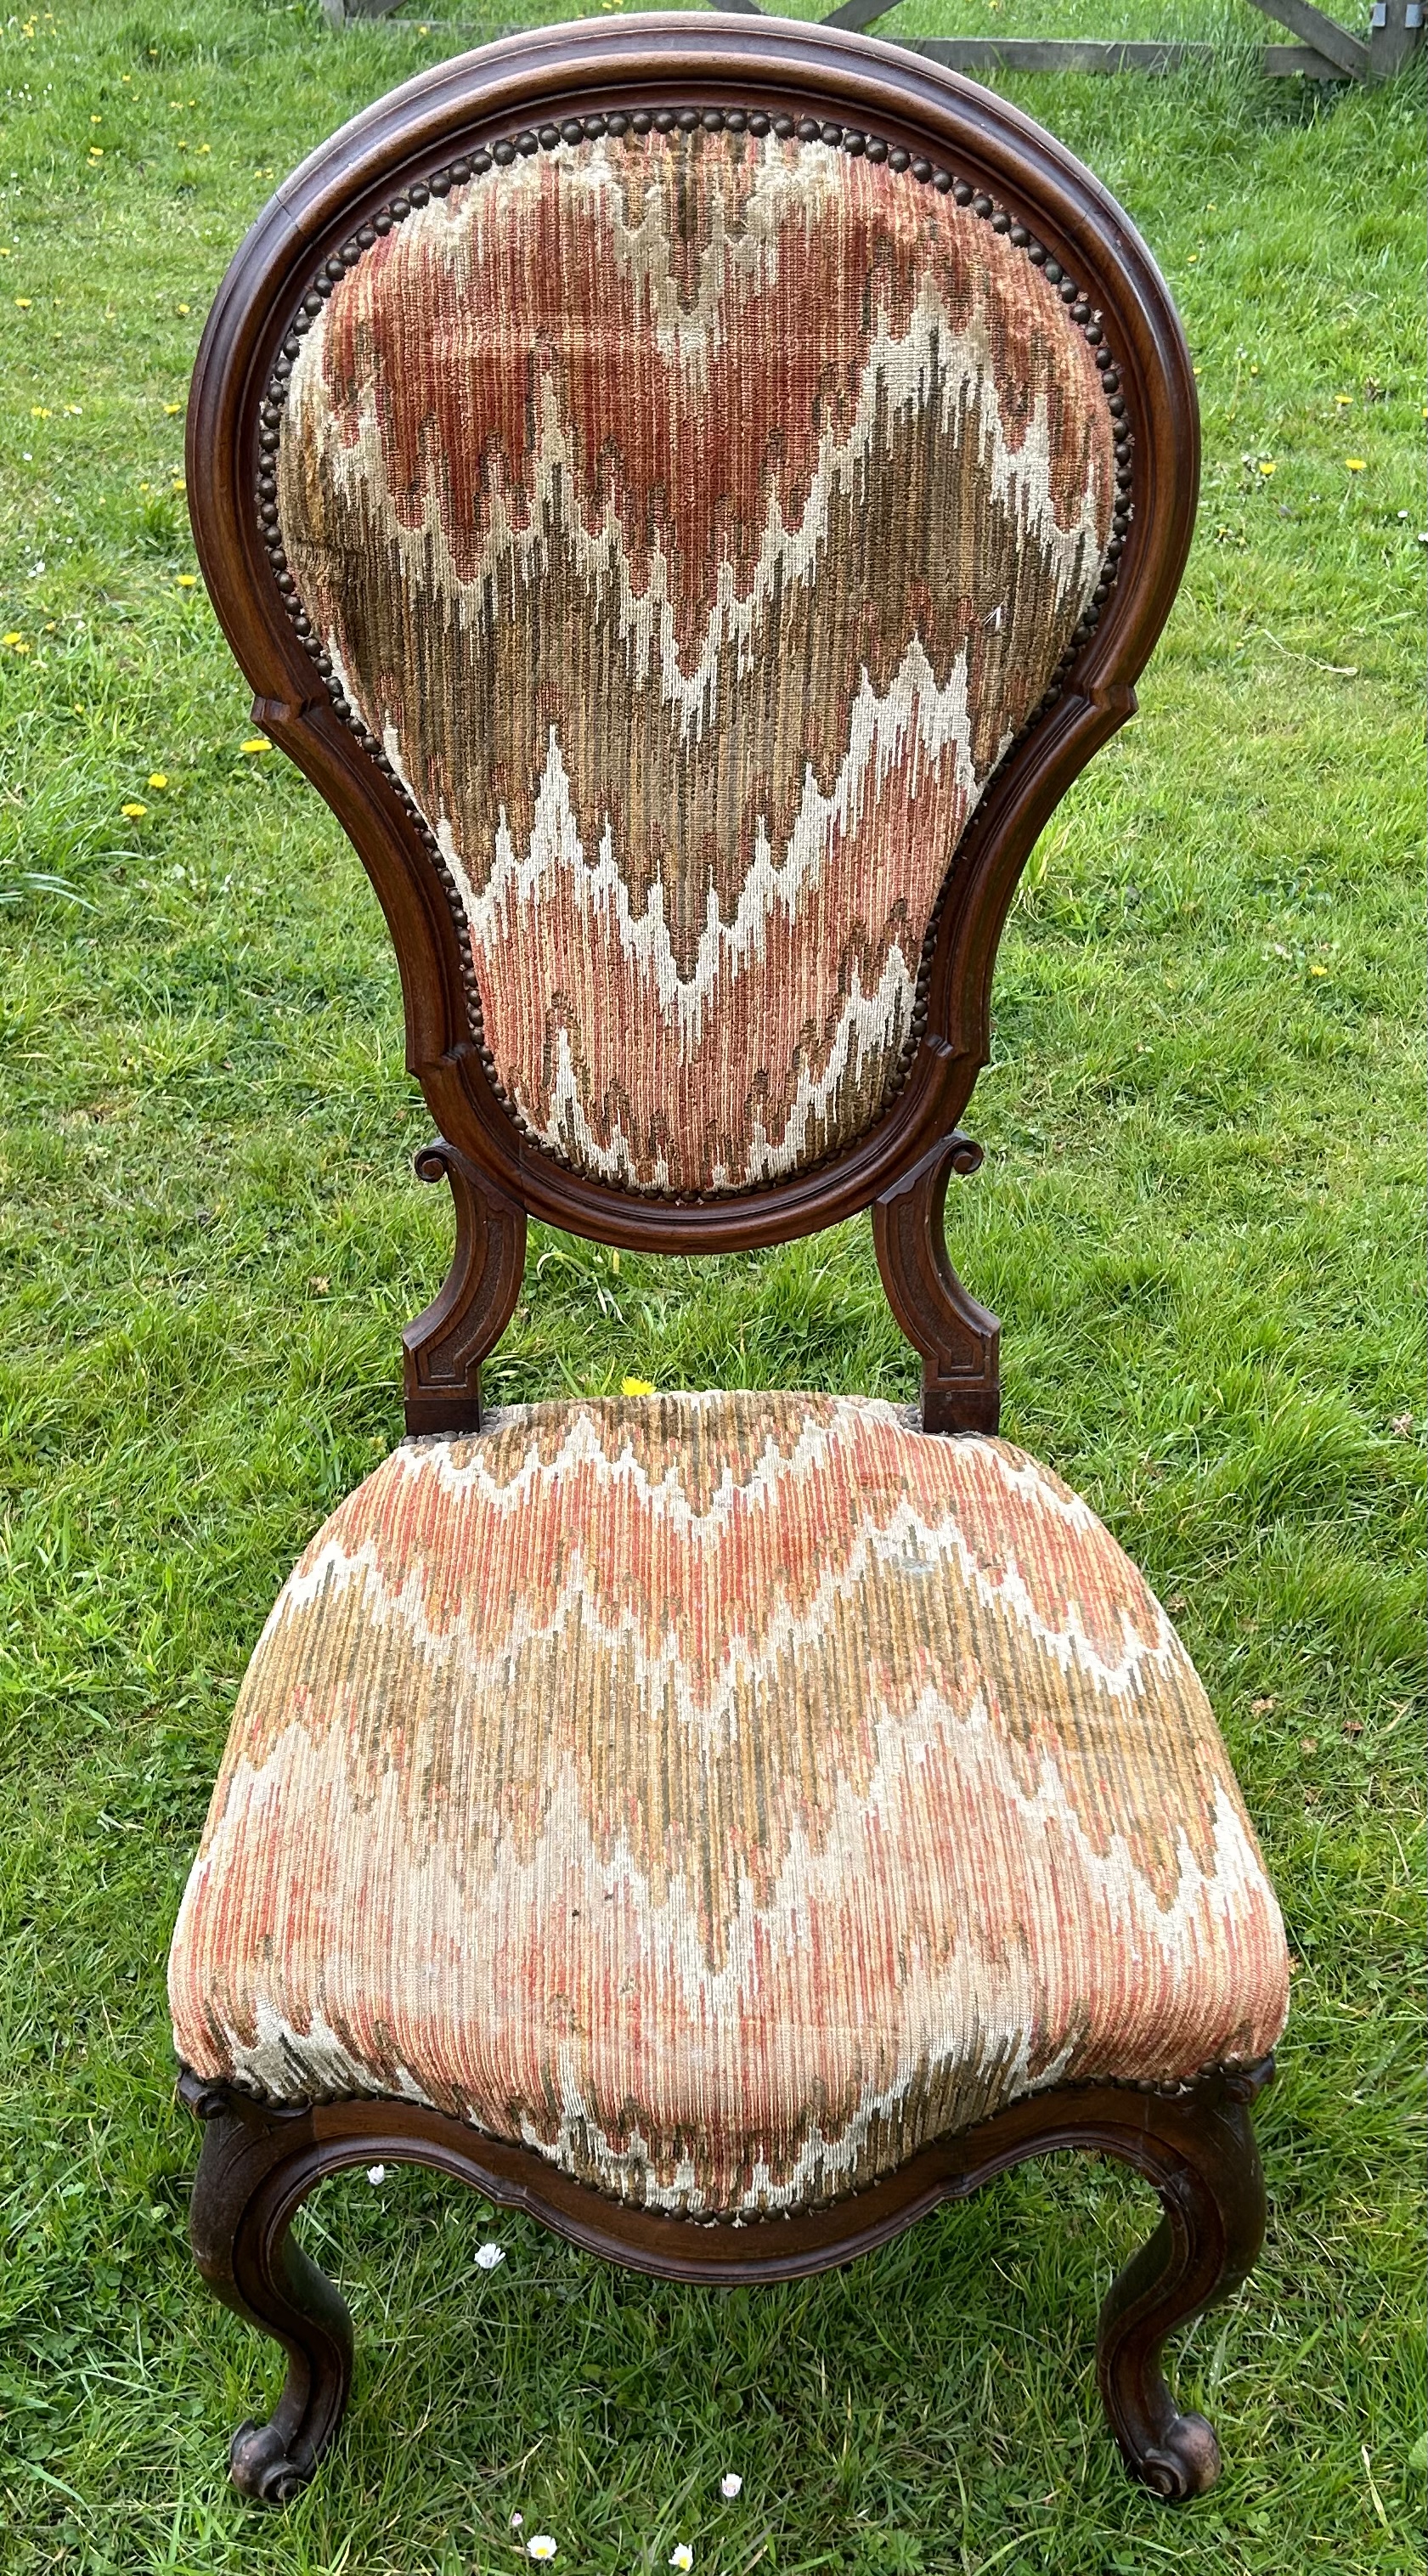 A Liberty covered chair